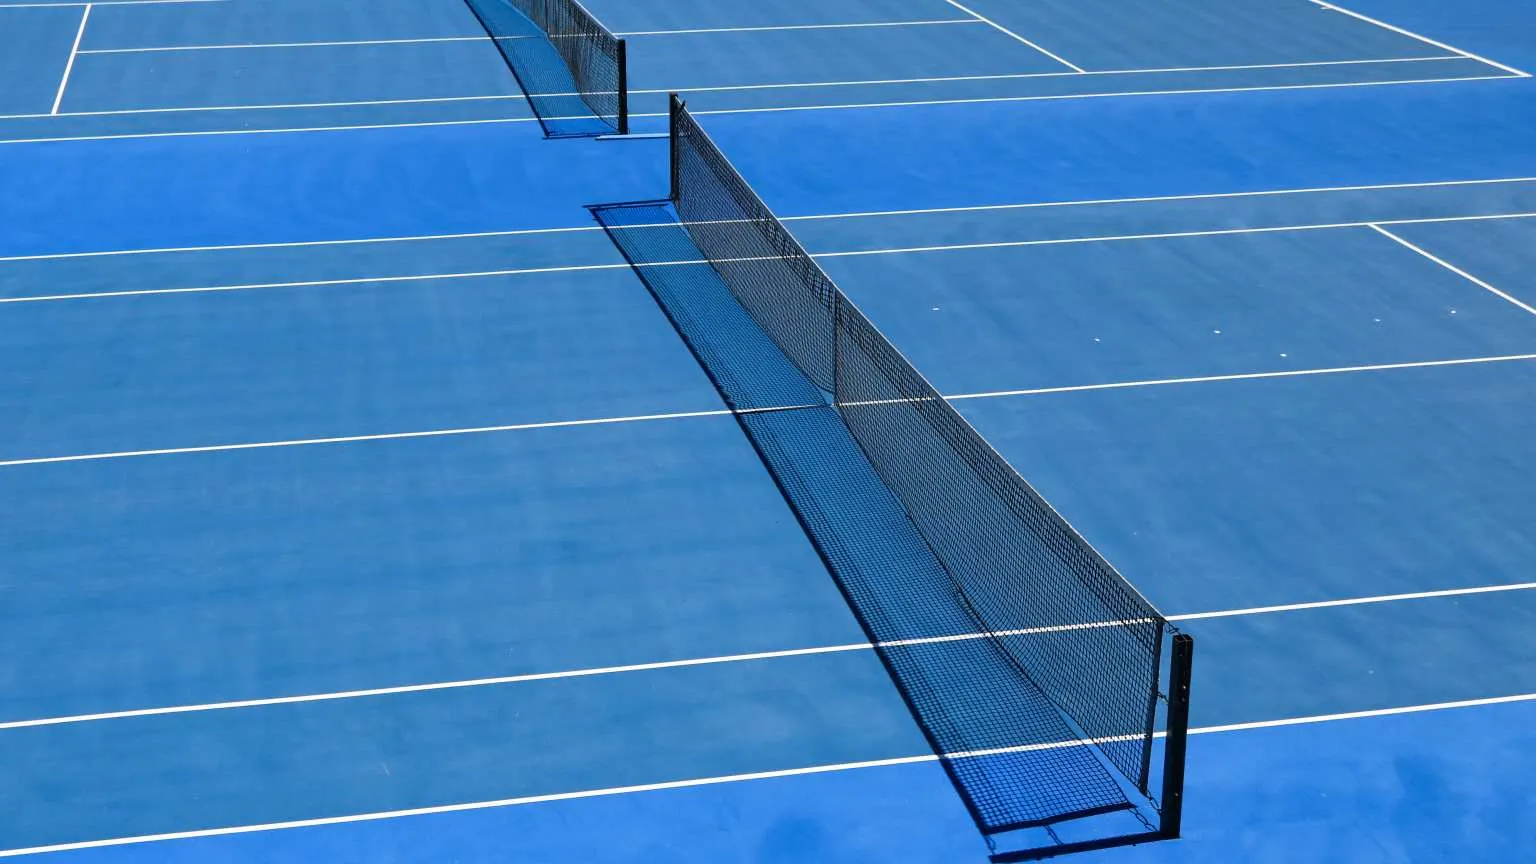 High angle view  of blue tennis court and net